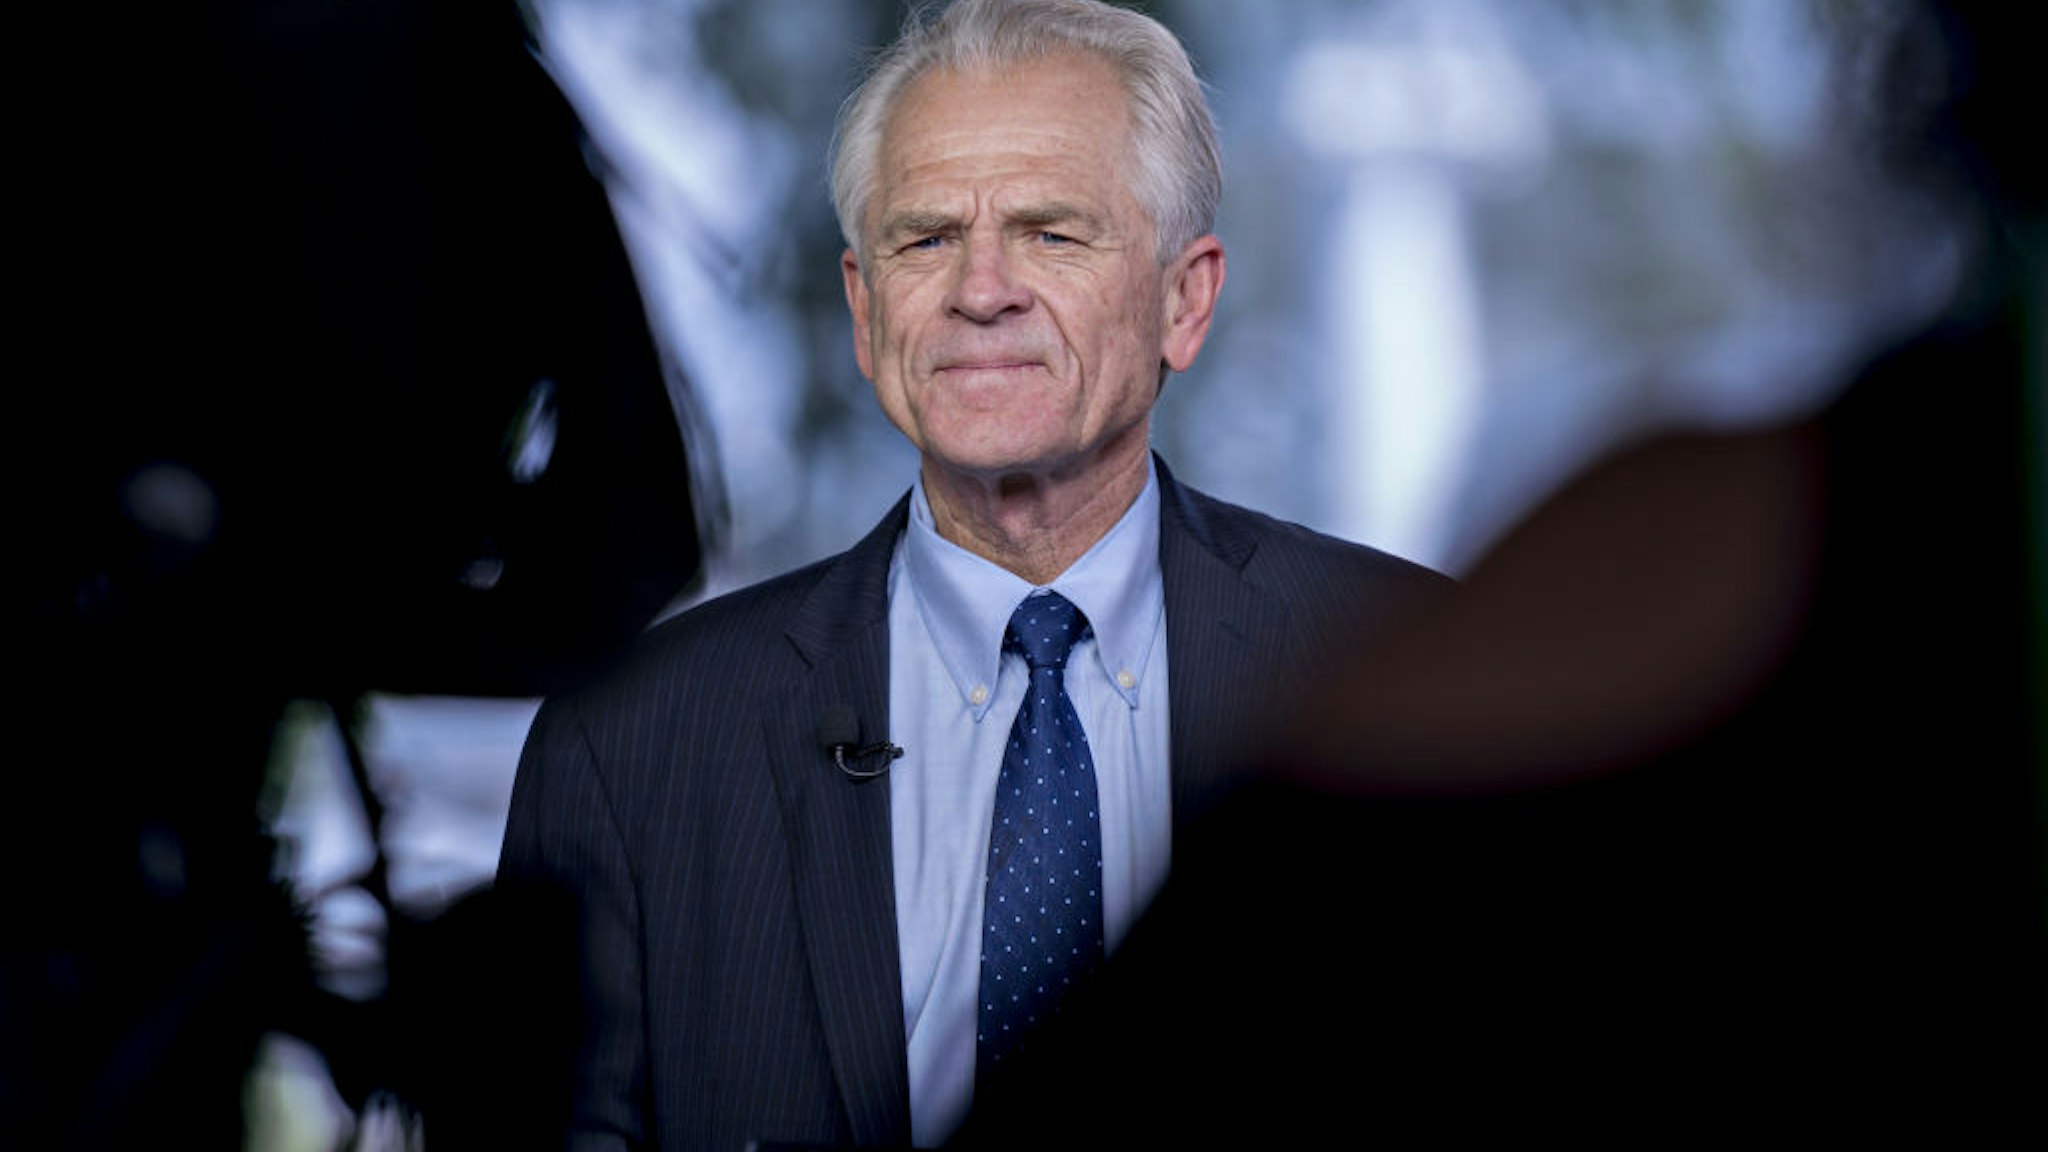 Peter Navarro, director of the National Trade Council, pauses during a television interview outside the White House in Washington, D.C., U.S., on Friday, May 31, 2019.